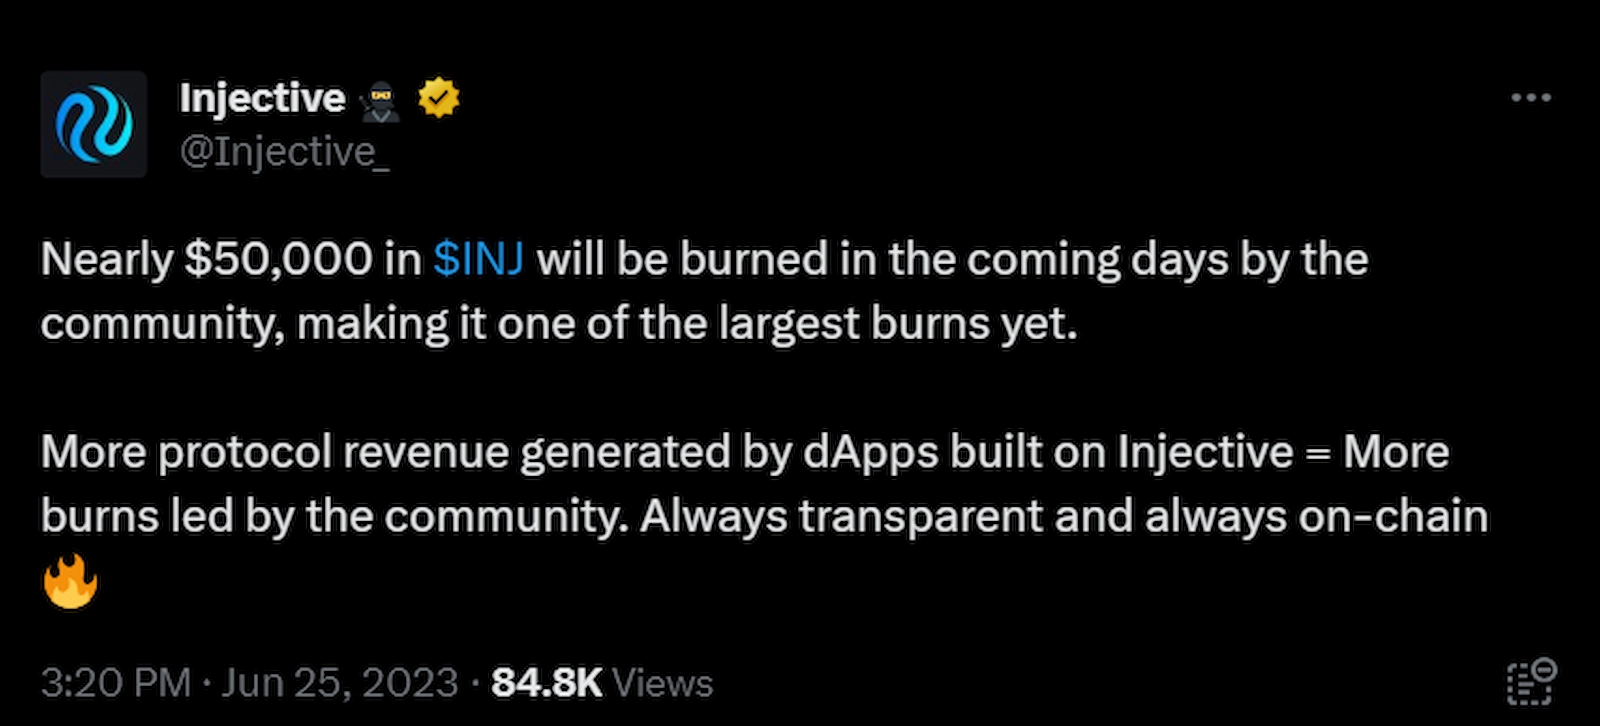 Injective Protocol announced a burn event that could boost INJ price